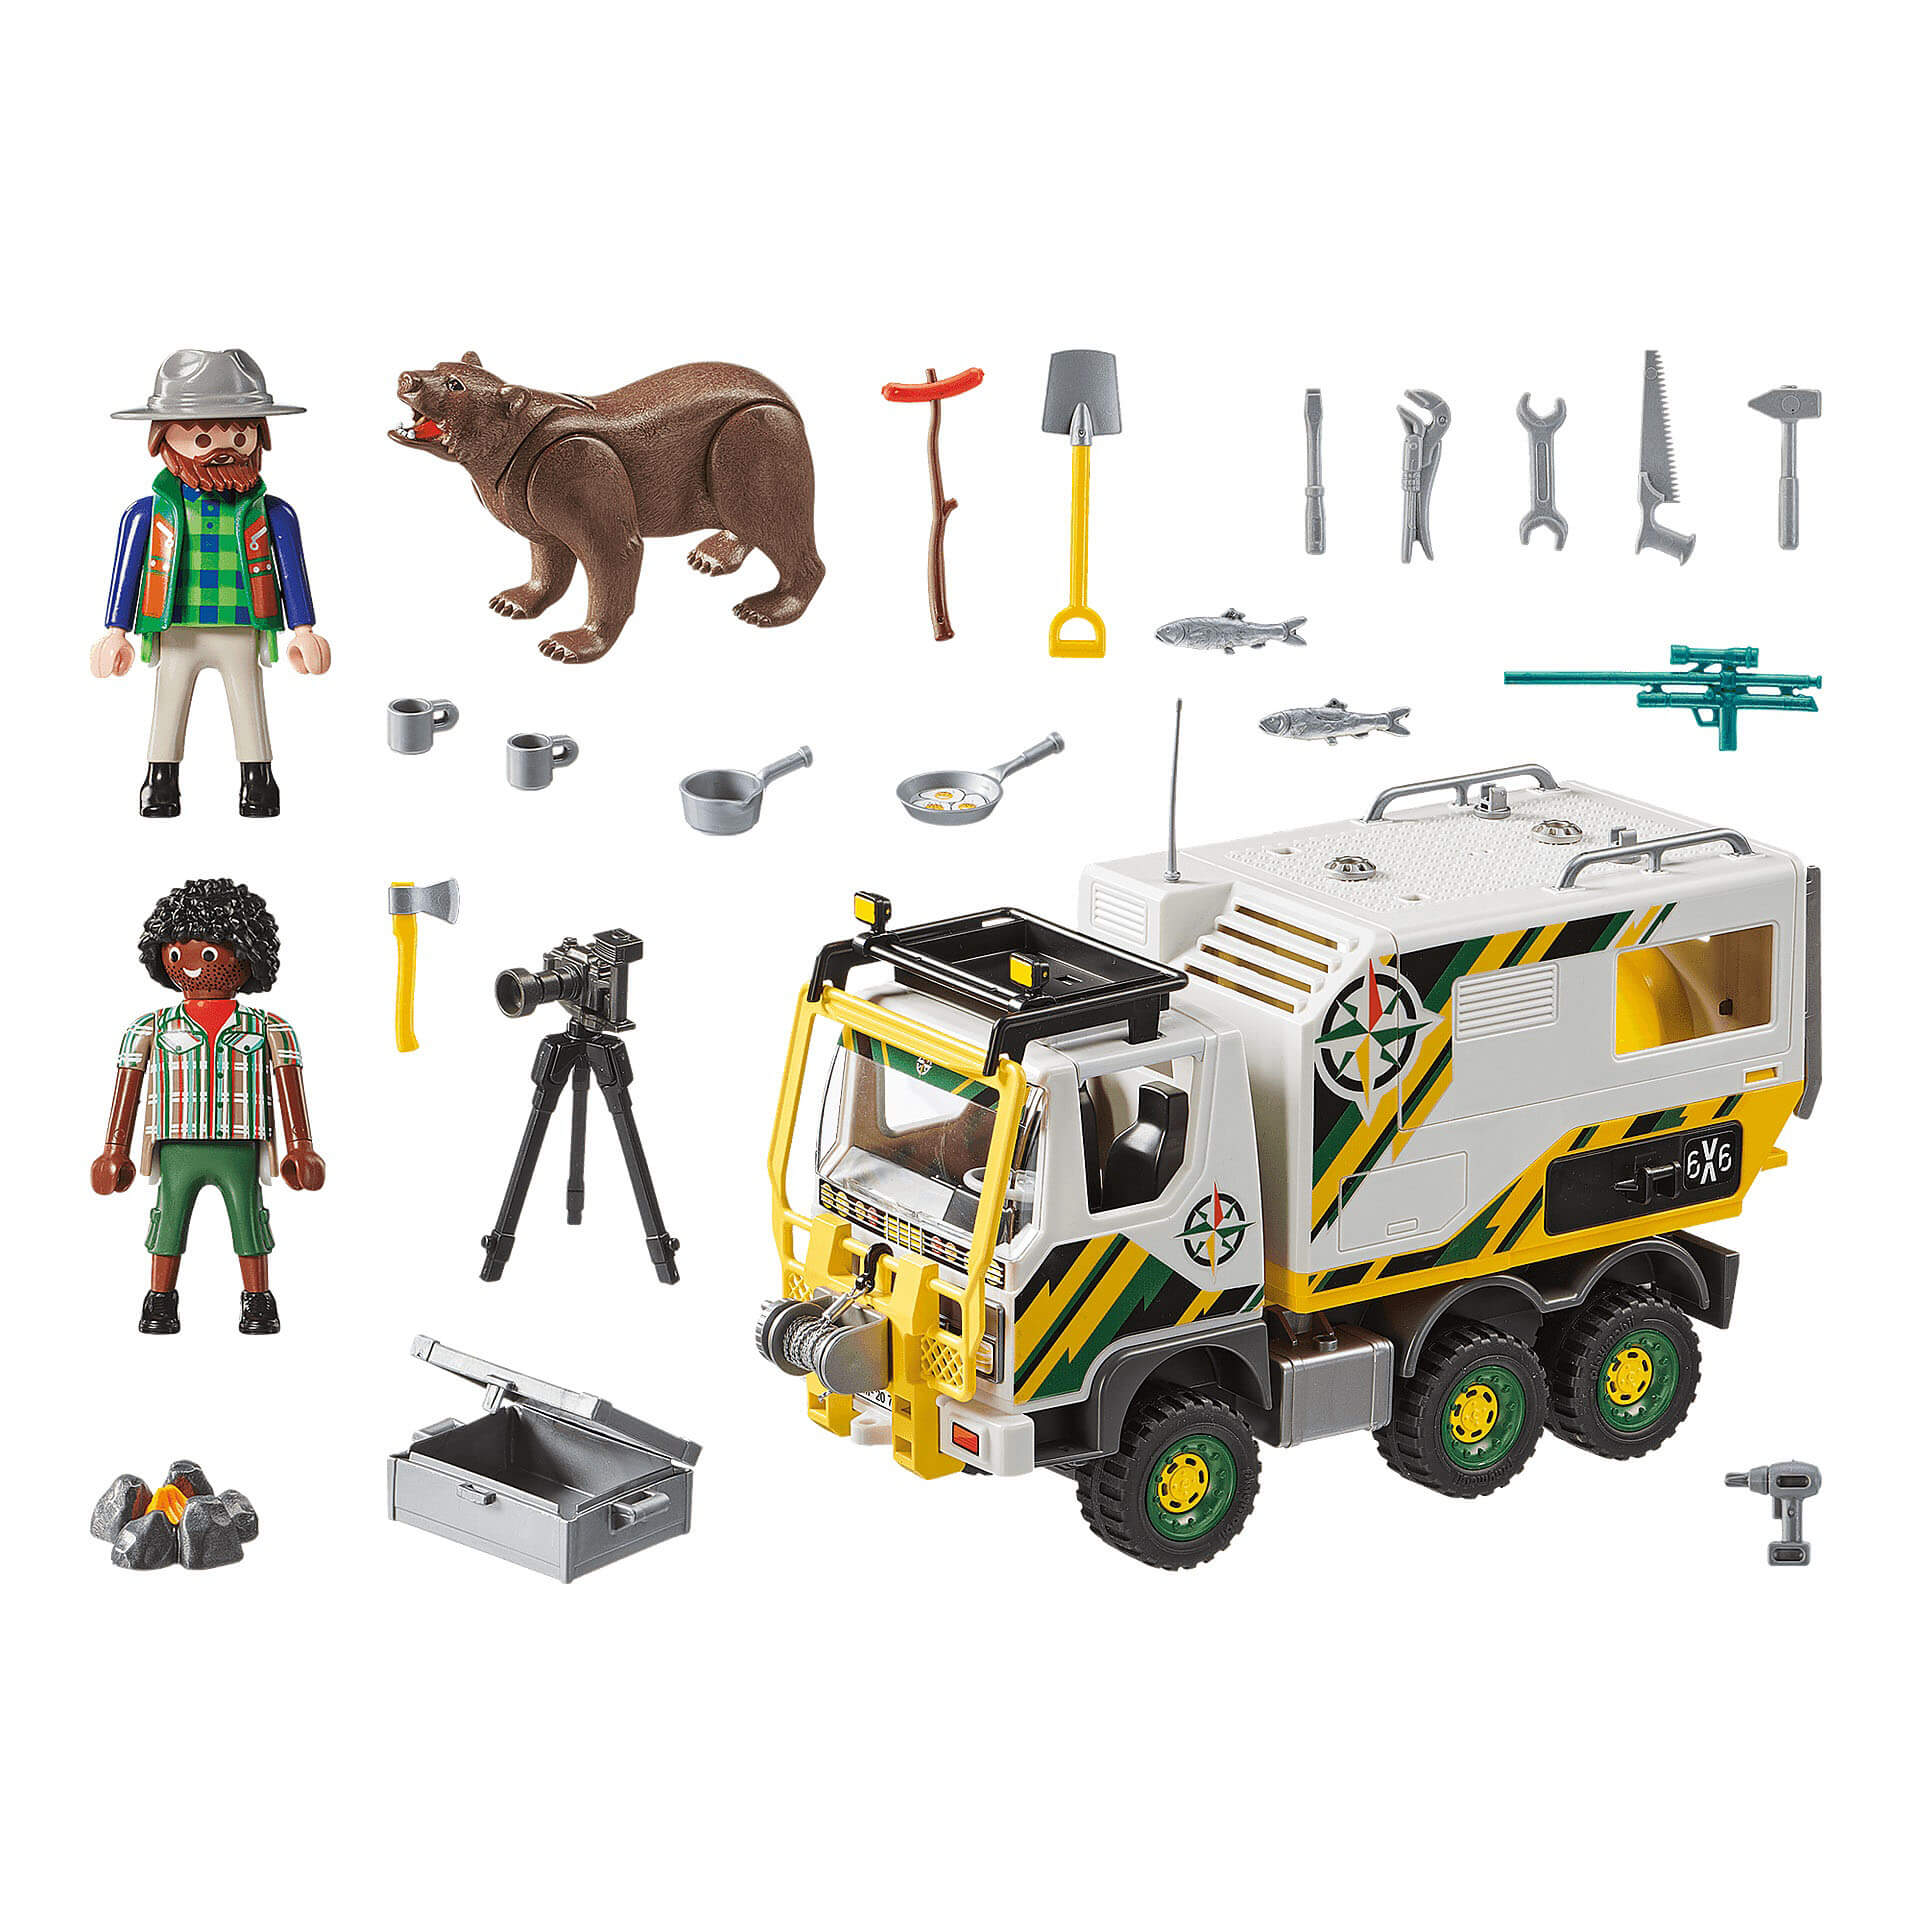 PLAYMOBIL Limited Edition Truck Outdoor Expedition Truck (70278)